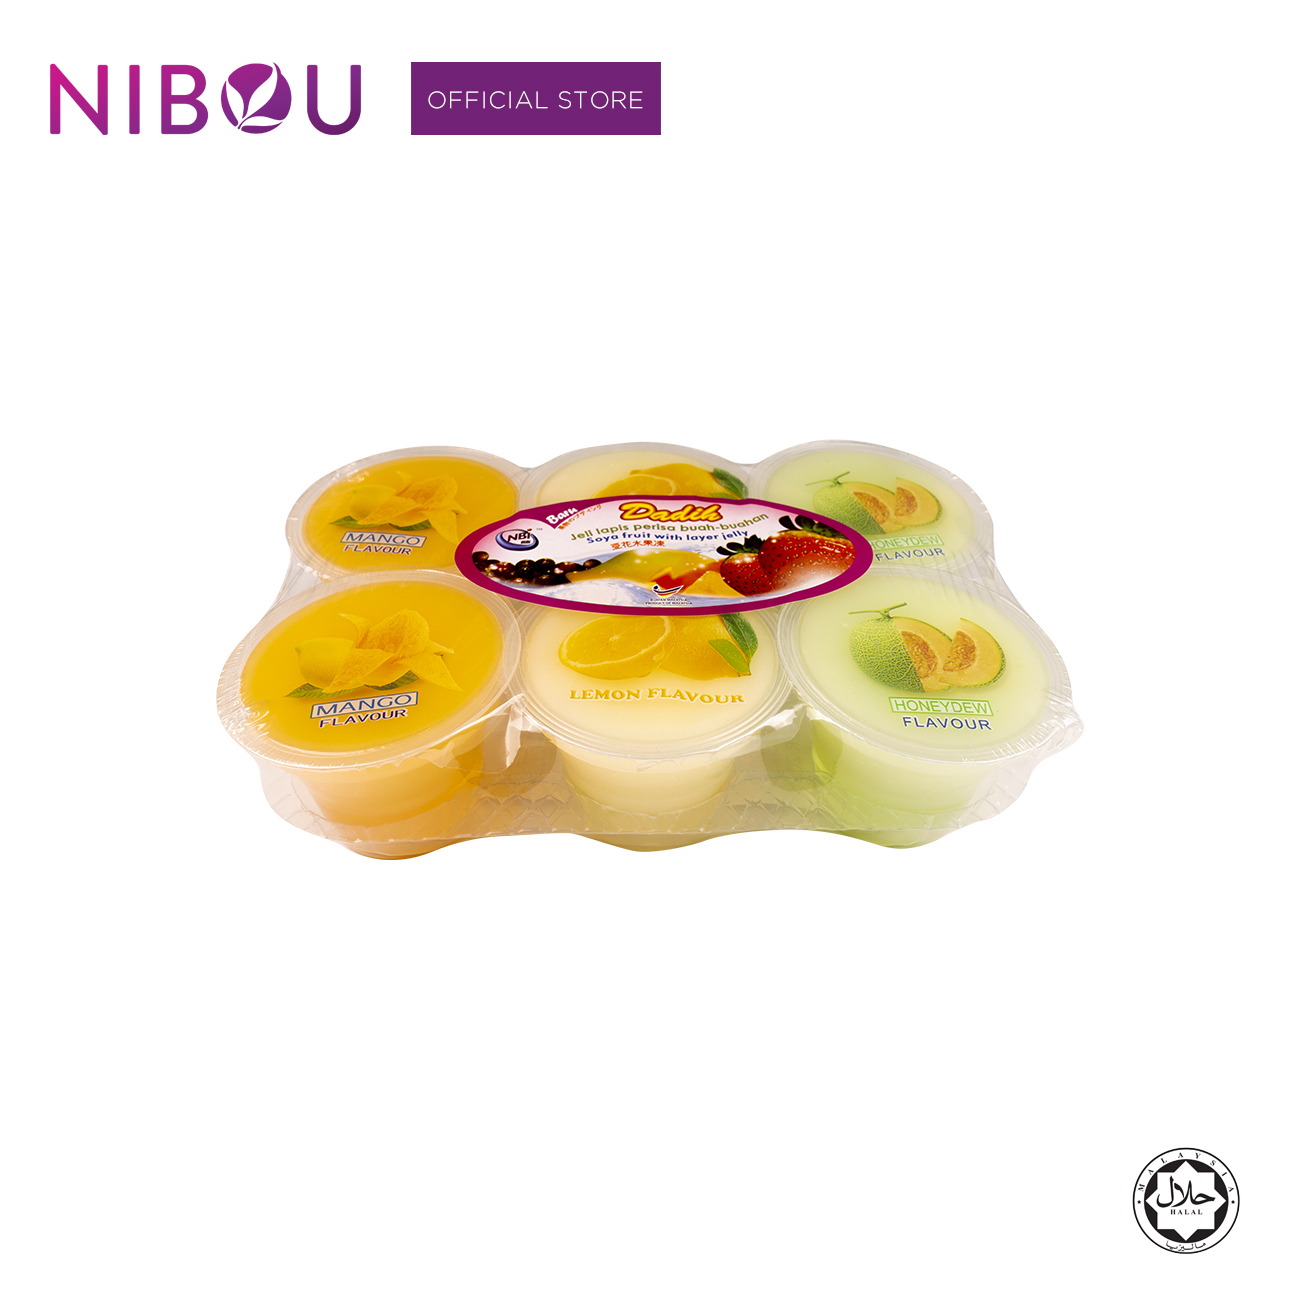 Nibou (NBI) Soya Fruits with Layer Jelly Assorted 2 (110gm x 6's x 16)